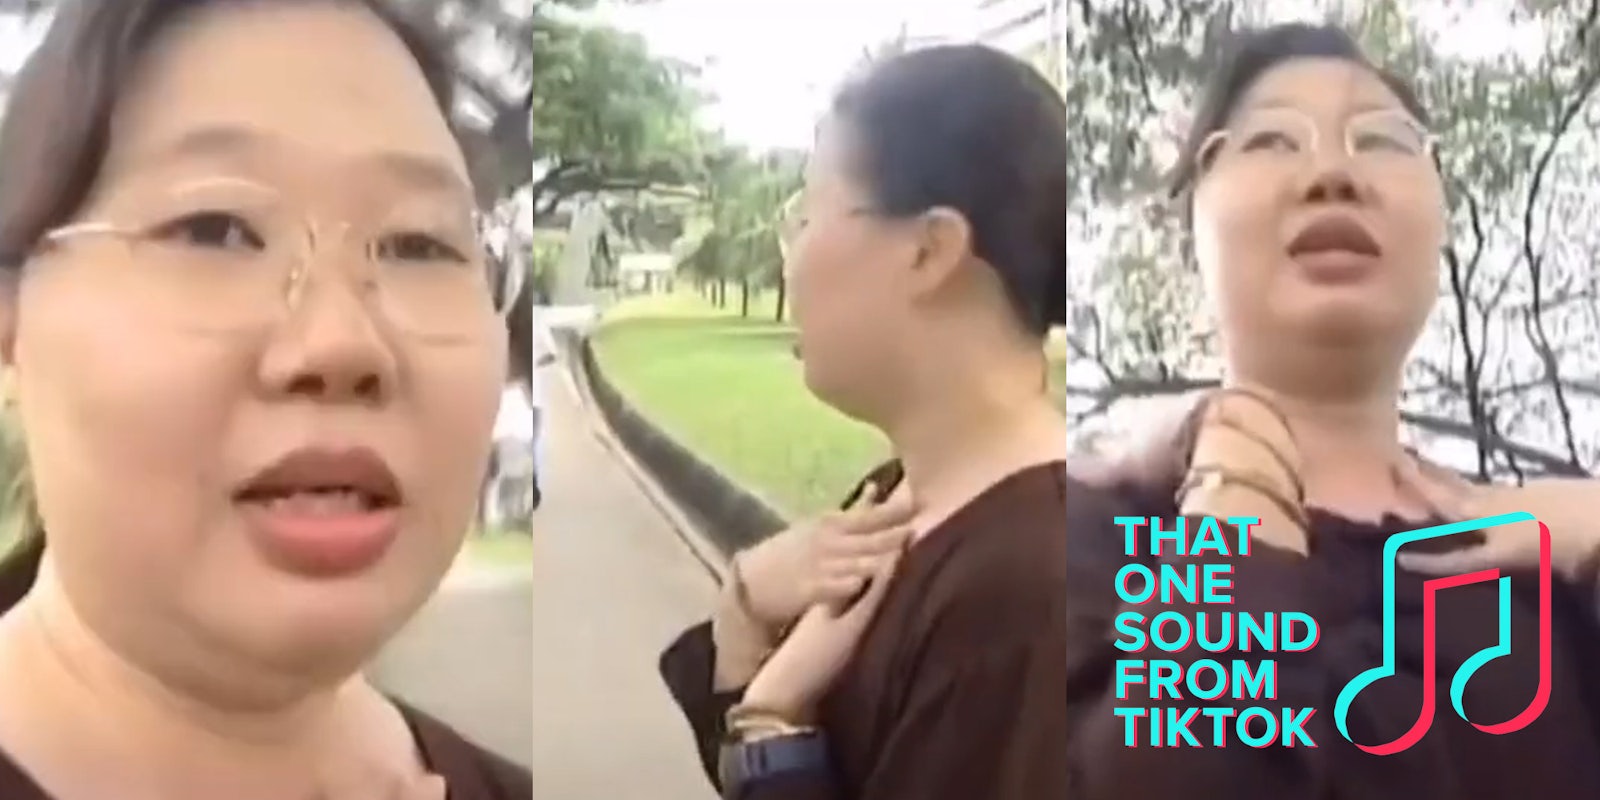 woman in park with hands on chest, caption 'that one sound from tiktok'